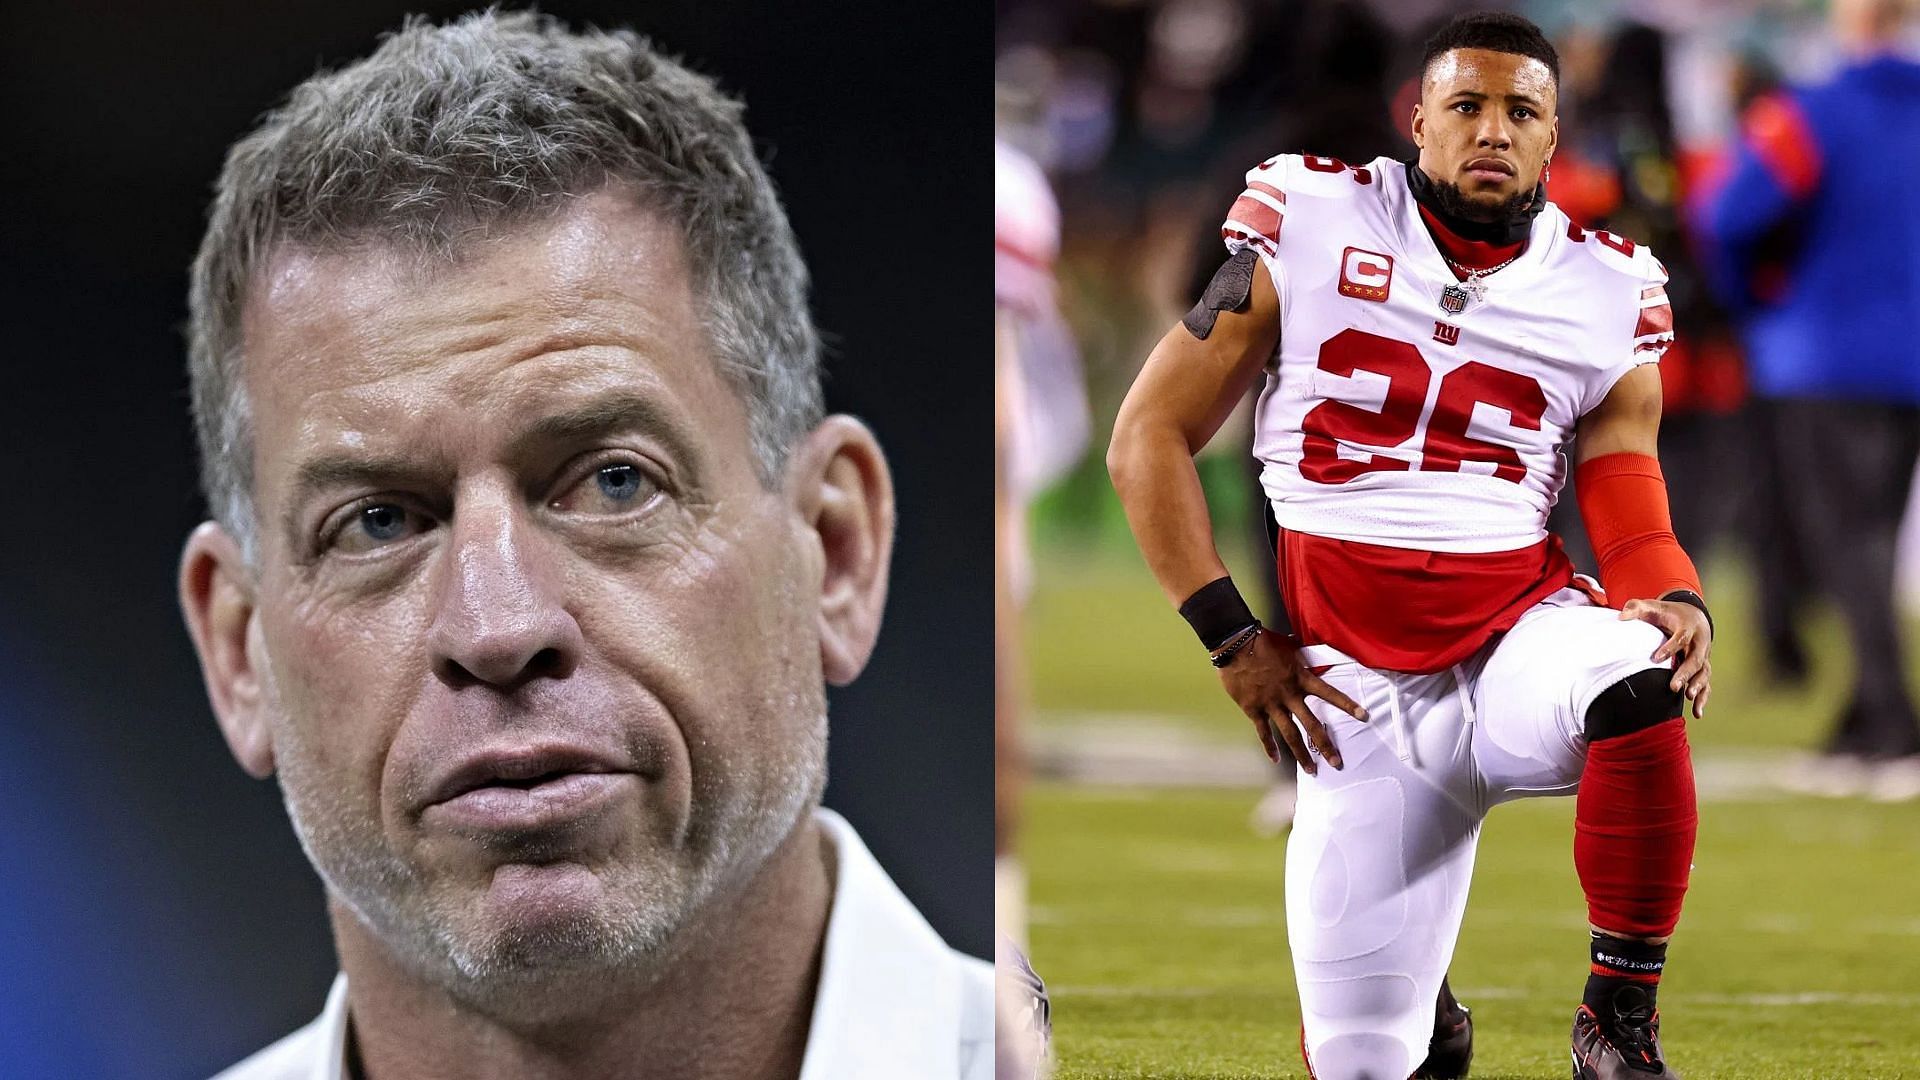 Troy Aikman gives his thoughts on Barkley.